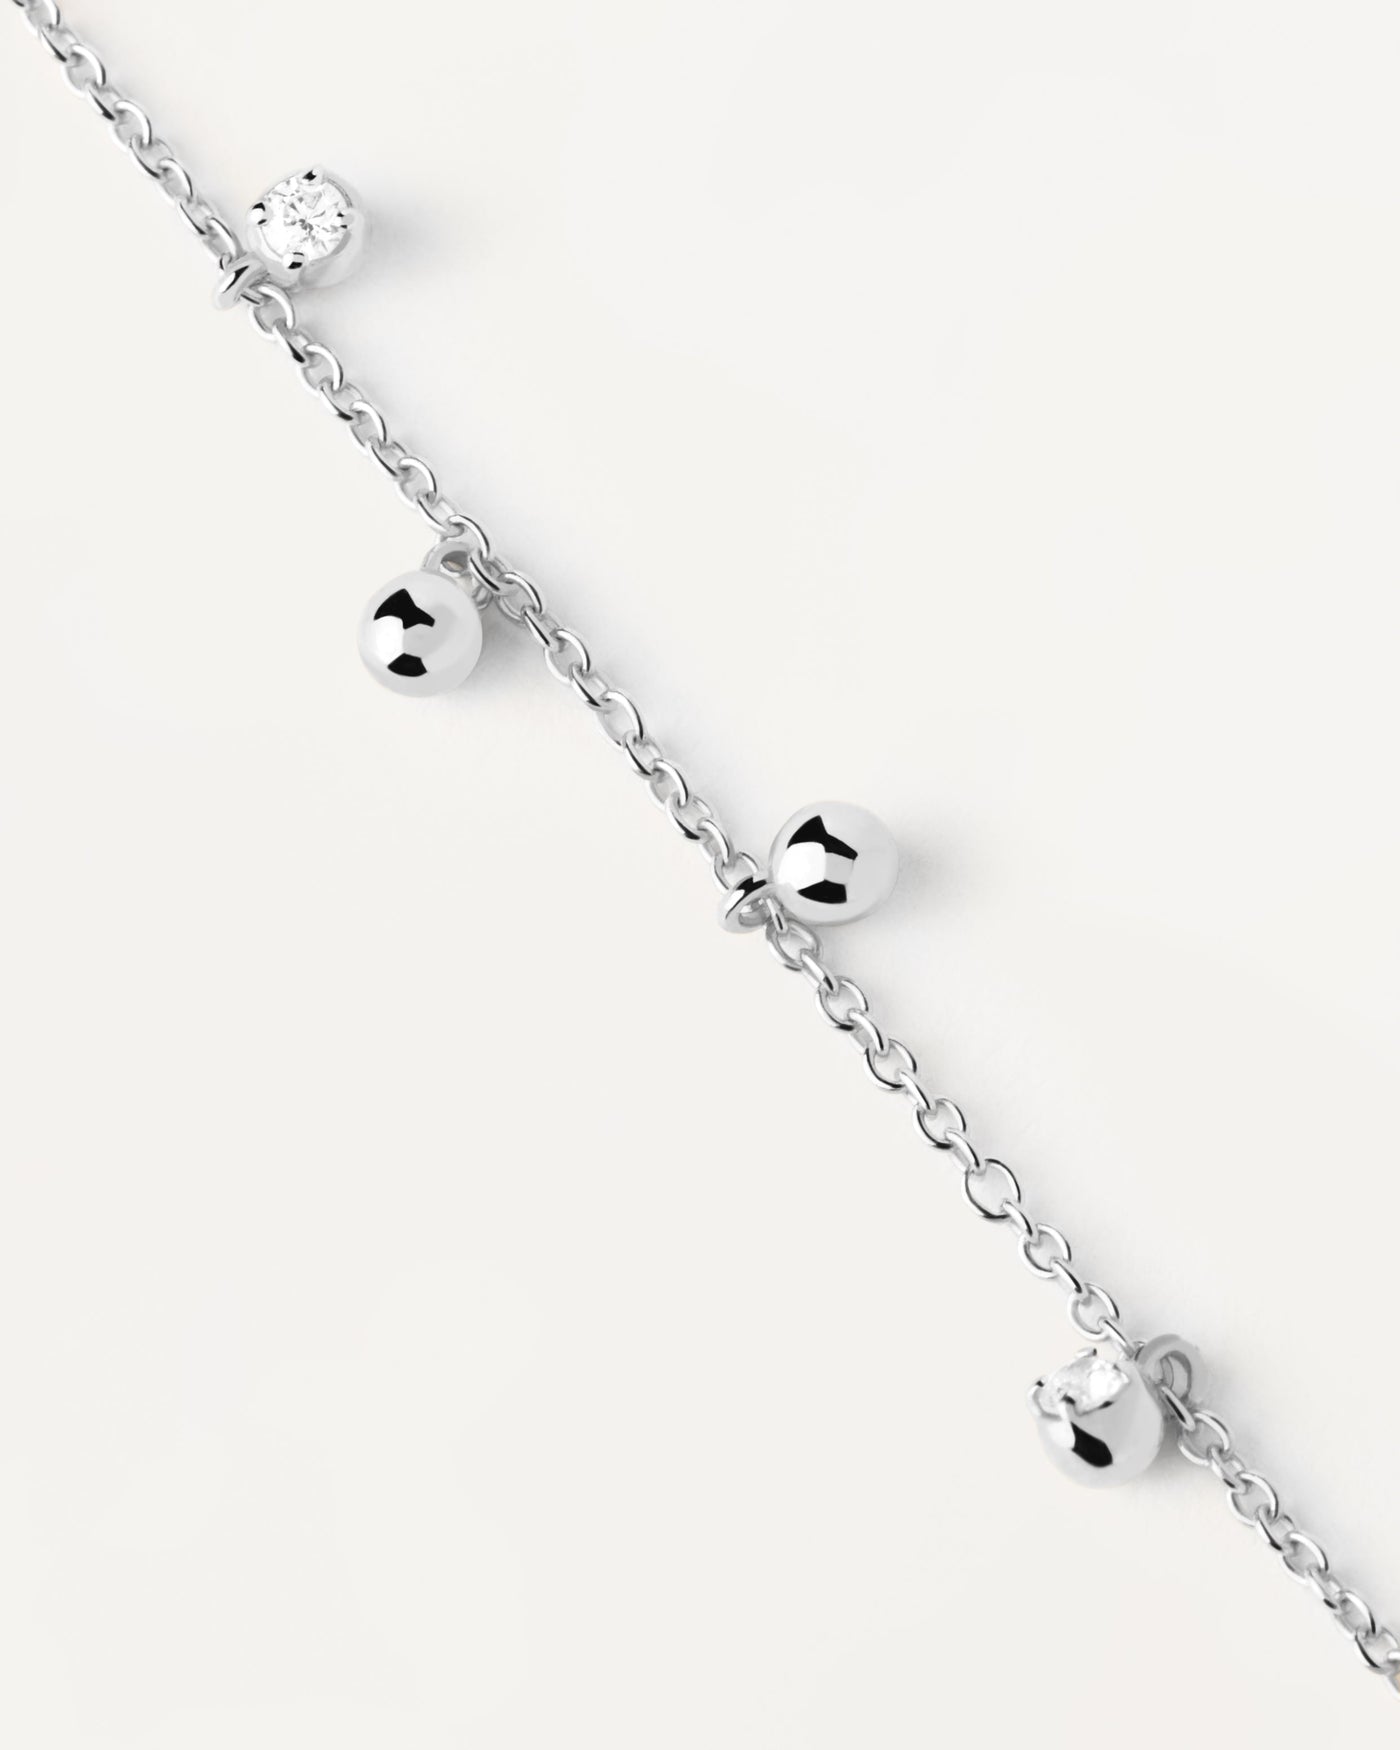 2023 Selection | Bubble Silver Bracelet. Sterling silver bracelet with small zirconia and ball pendants. Get the latest arrival from PDPAOLA. Place your order safely and get this Best Seller. Free Shipping.